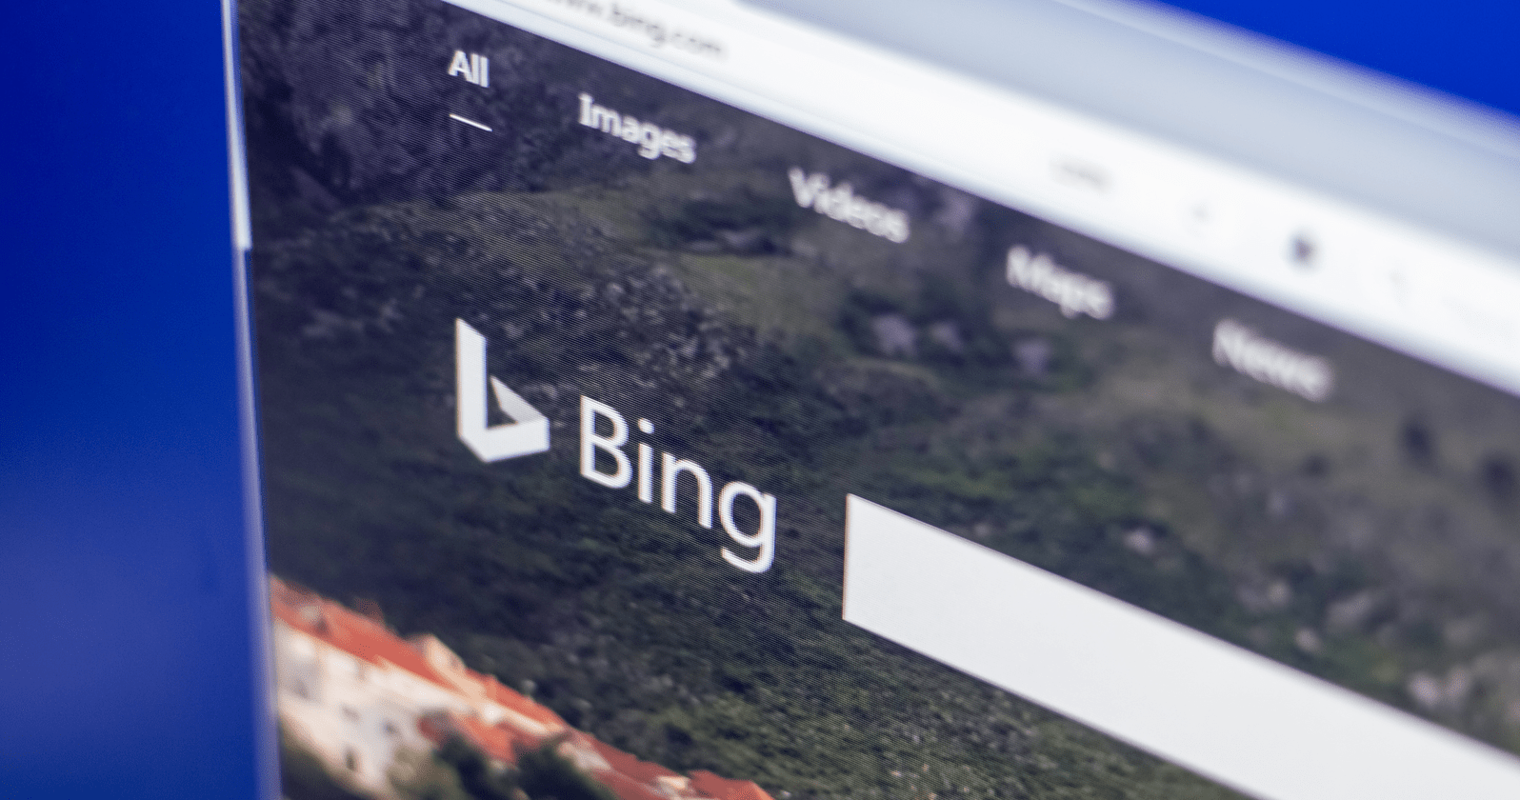 Bing is Removing its Public URL Submission Tool